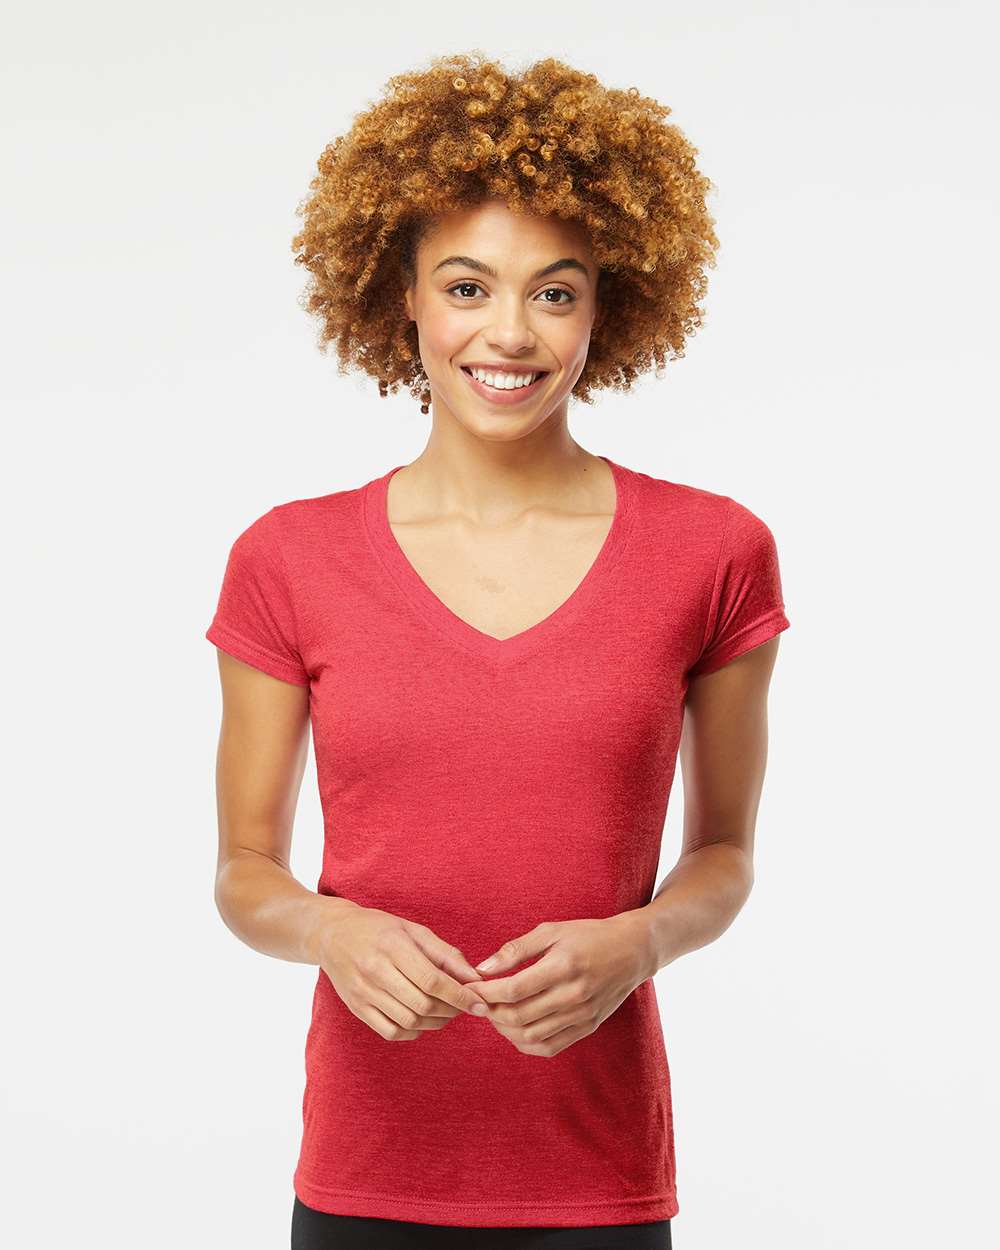 M&O Women's Deluxe Blend V-Neck T-Shirt 3542 #colormdl_Heather Red